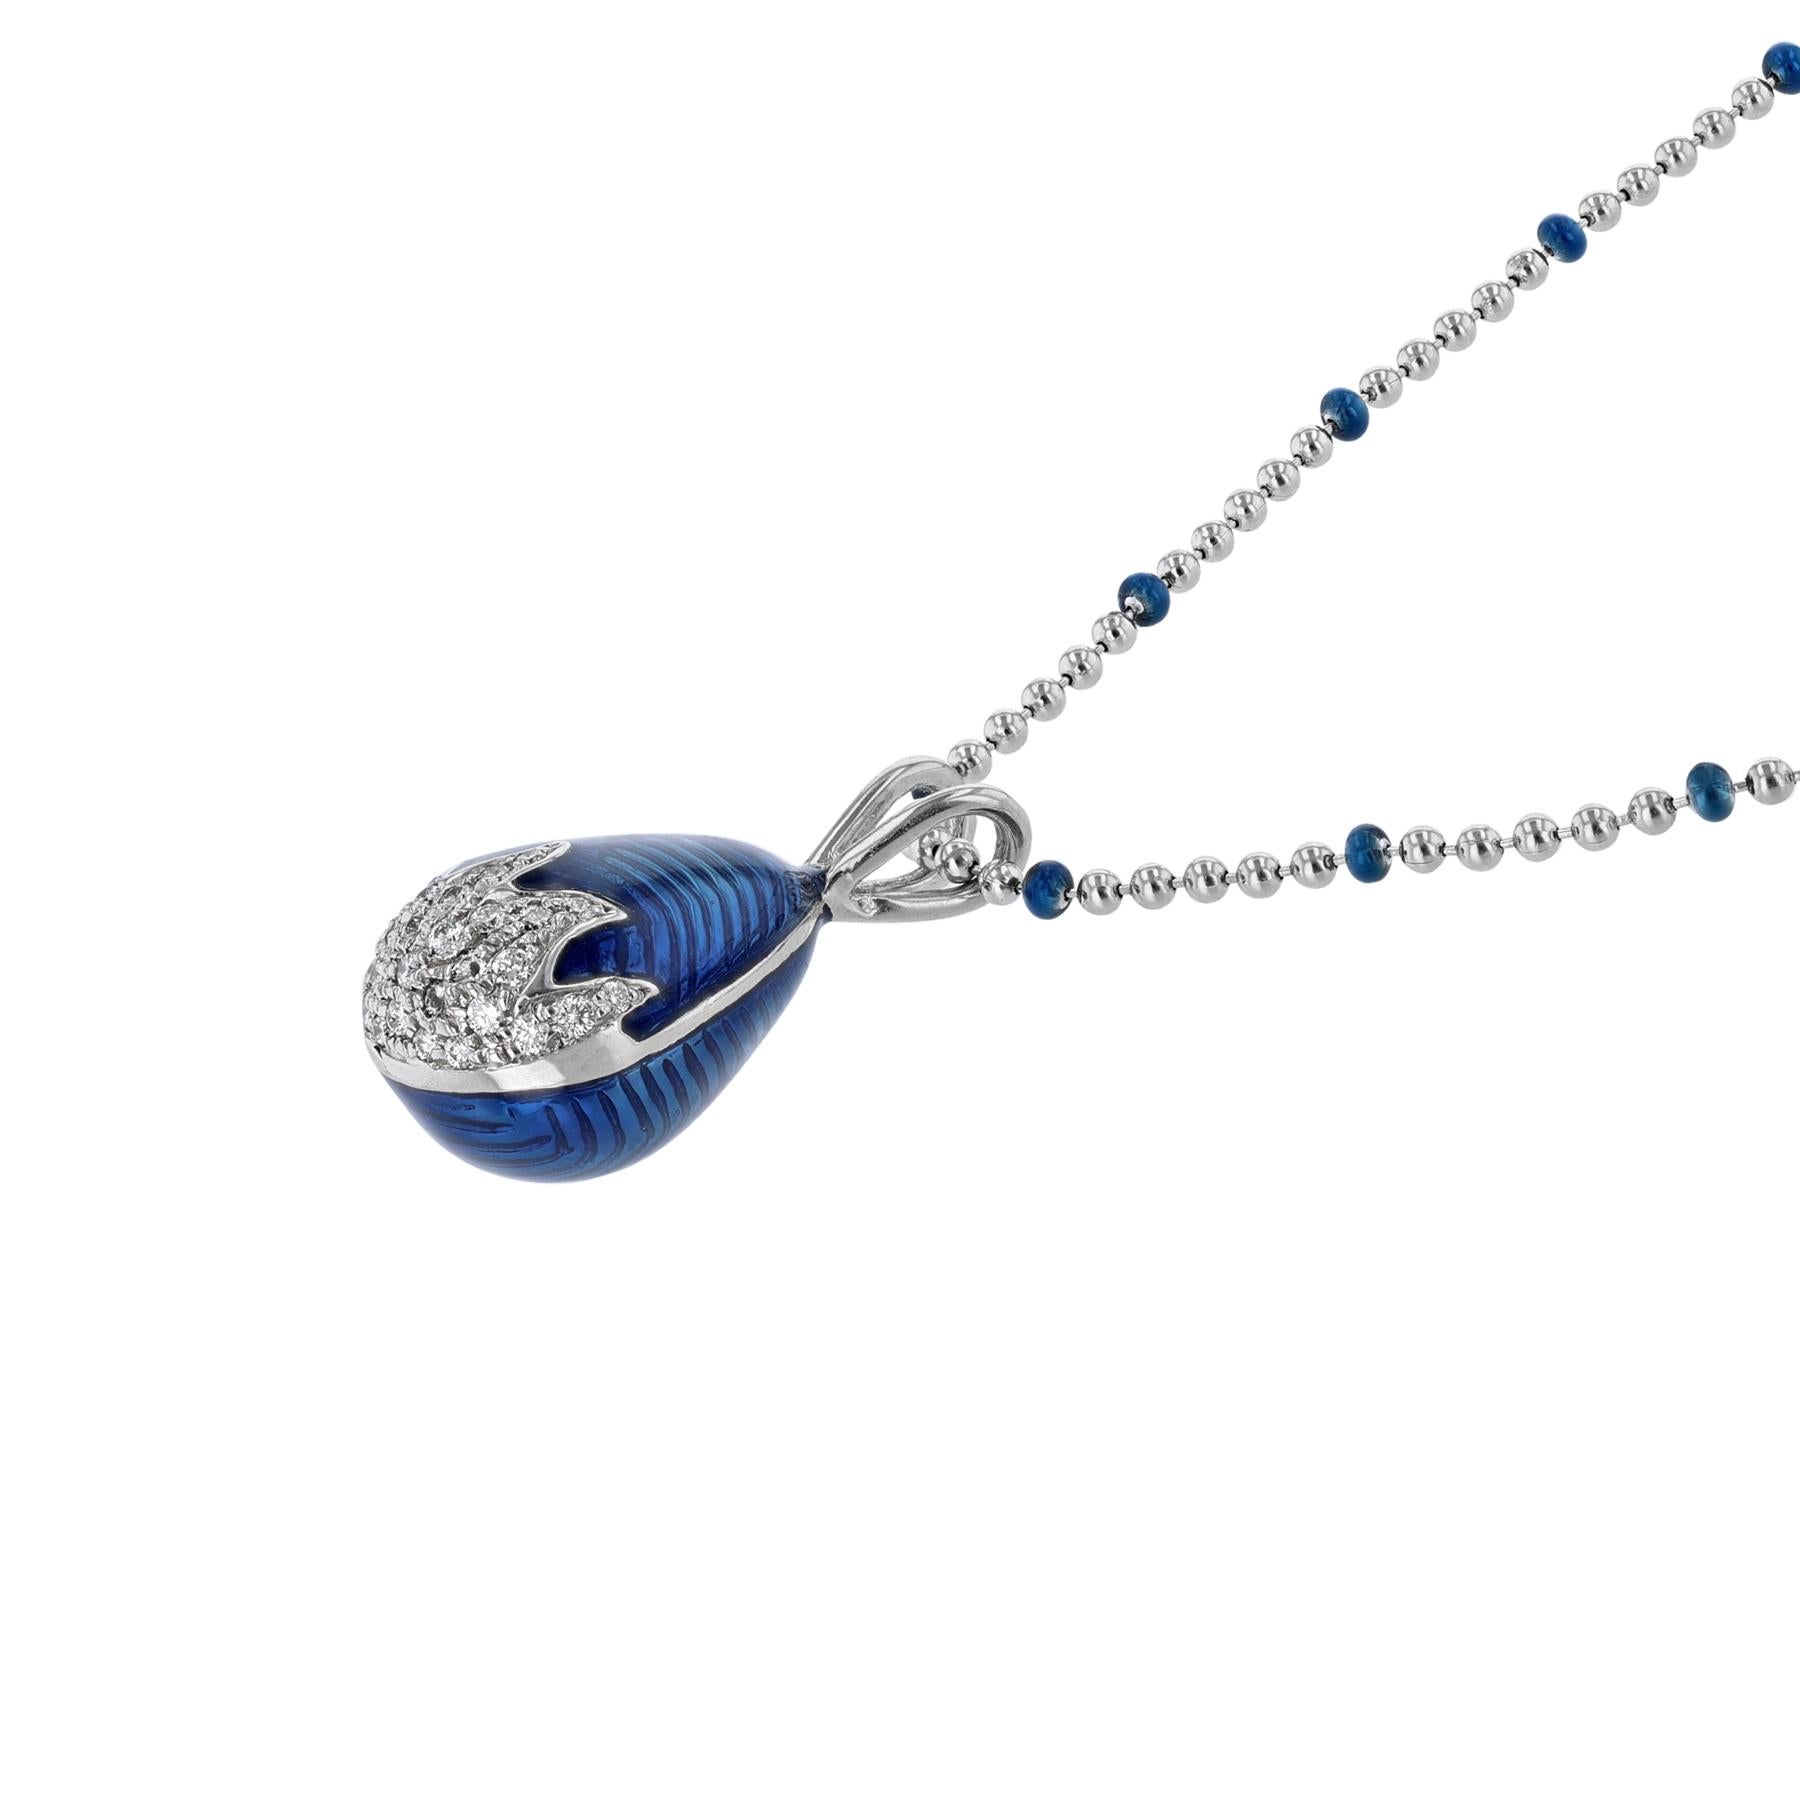 This necklace is made in 18K white gold and blue enamel. It features an egg pendant with 0.29 carat diamonds.